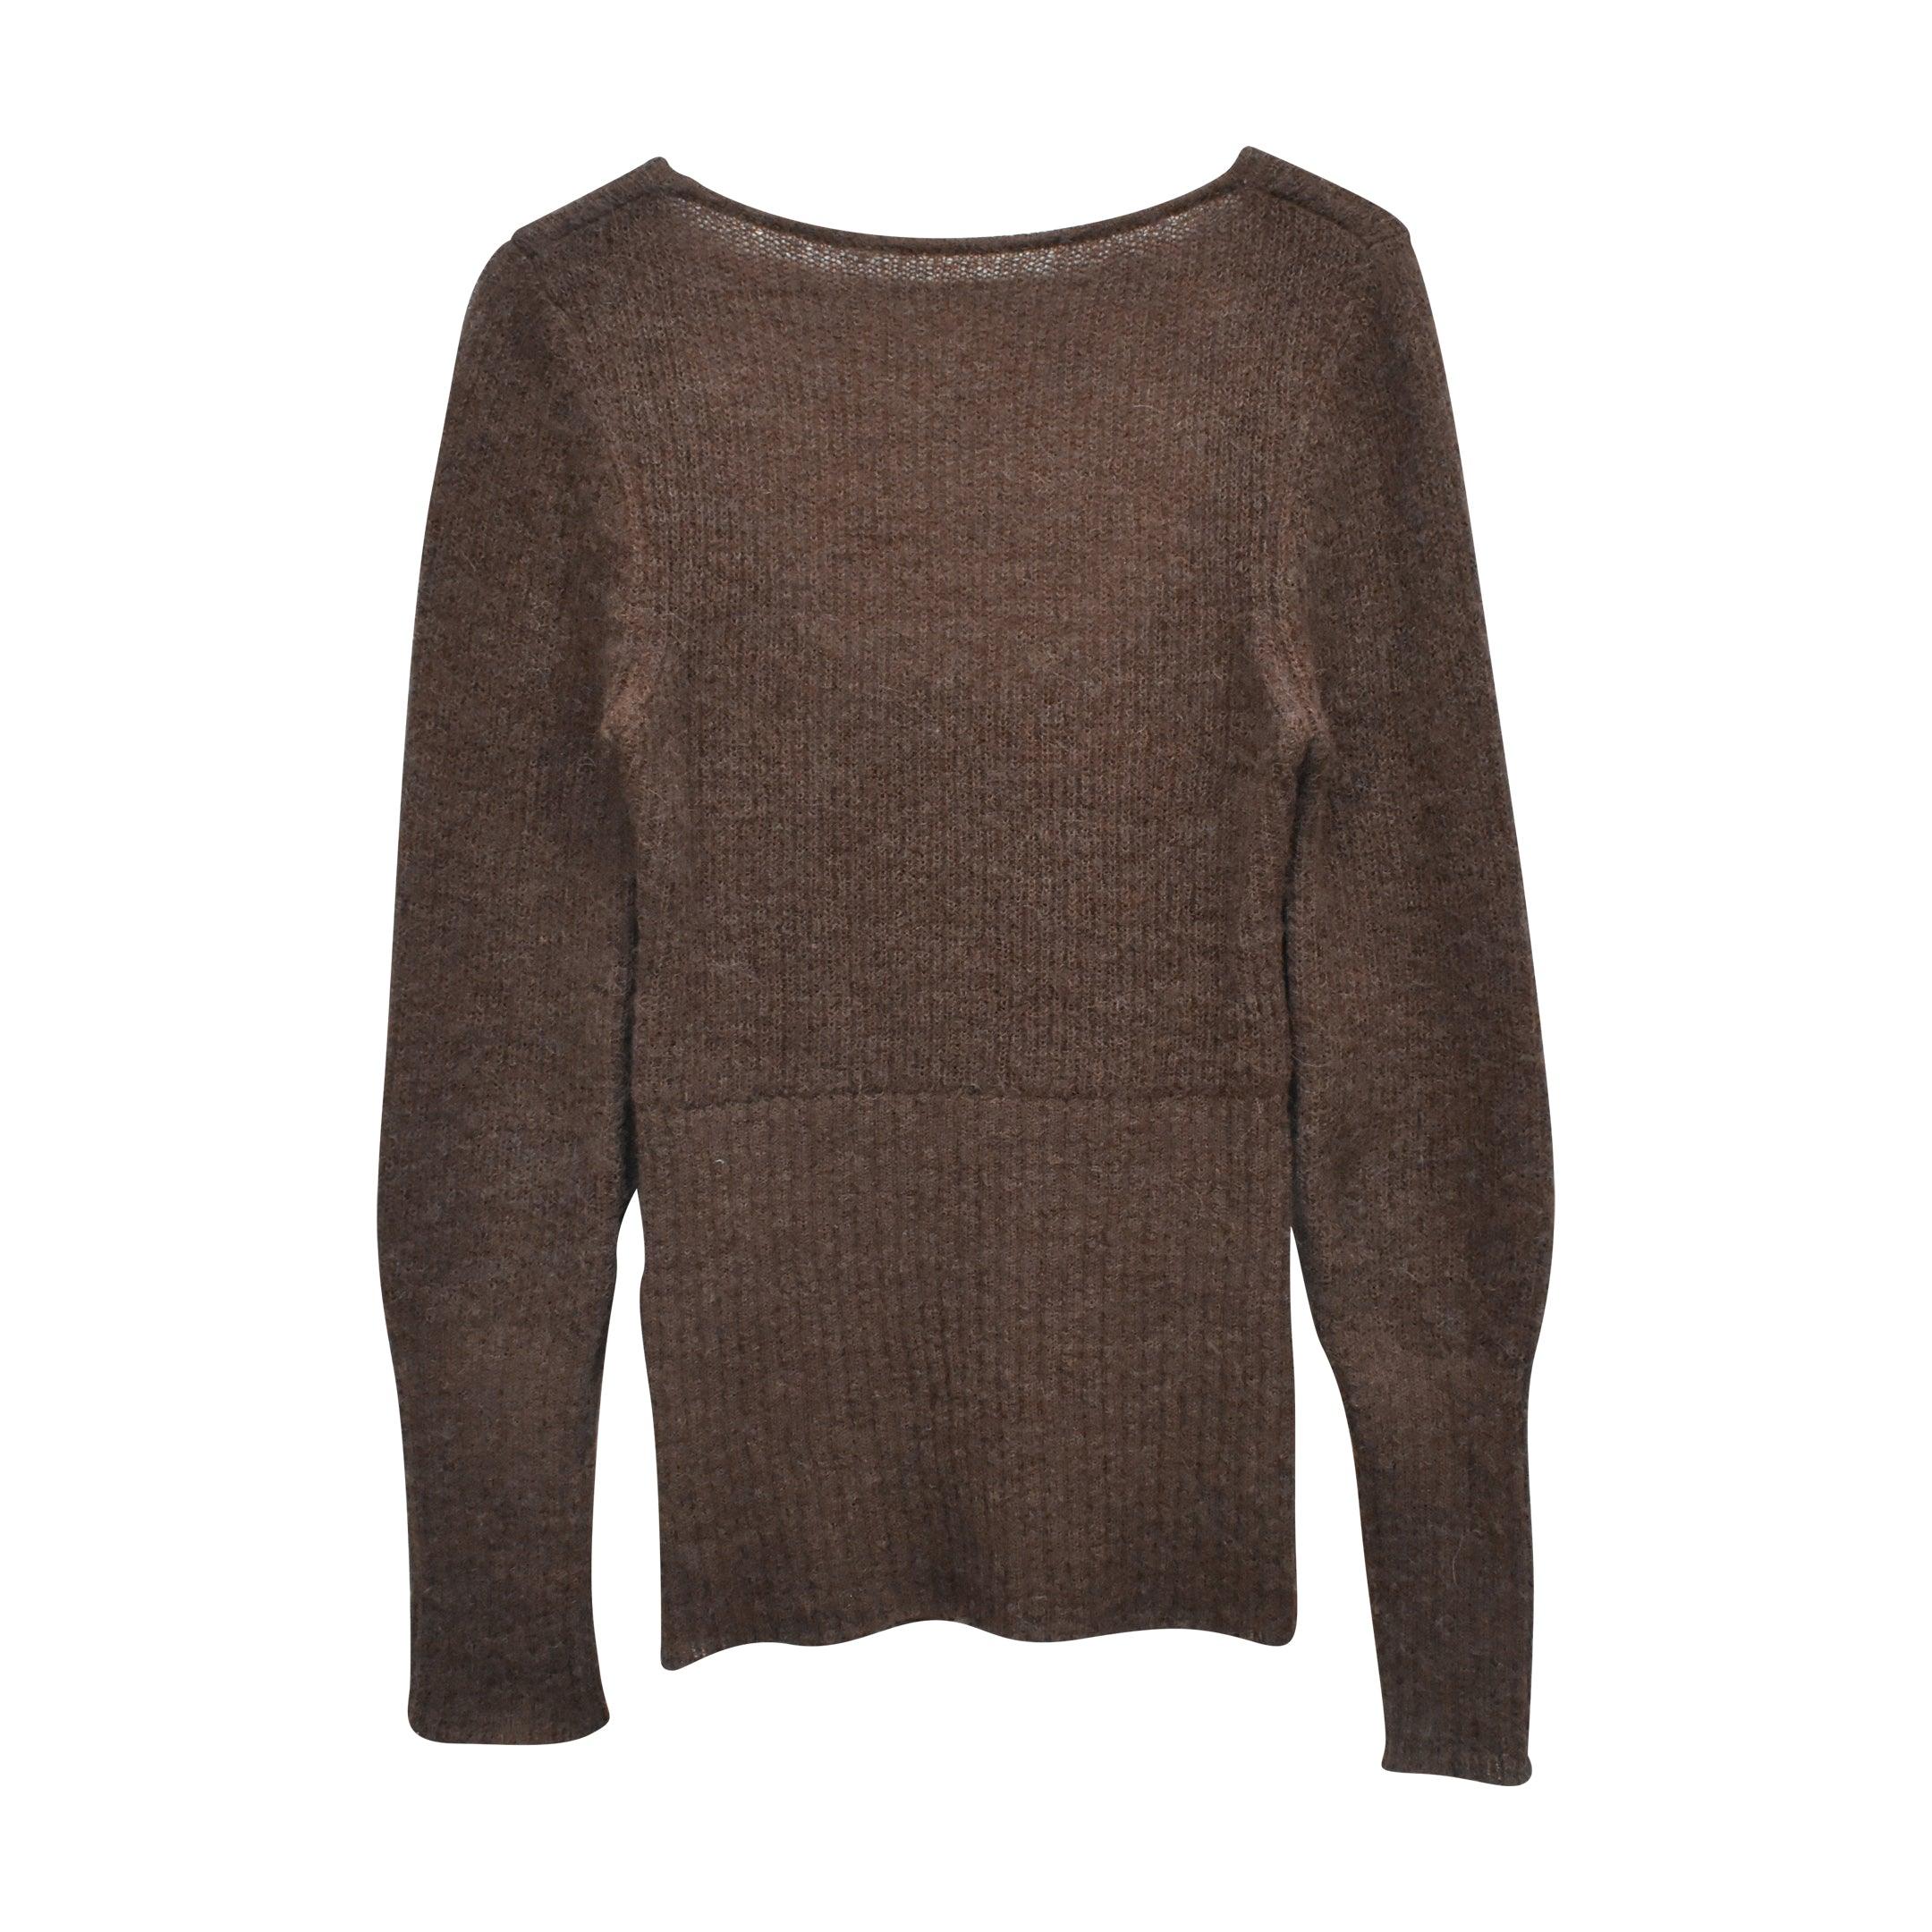 Jacquemus 'La Maille Dao' Sweater - Women's M - Fashionably Yours